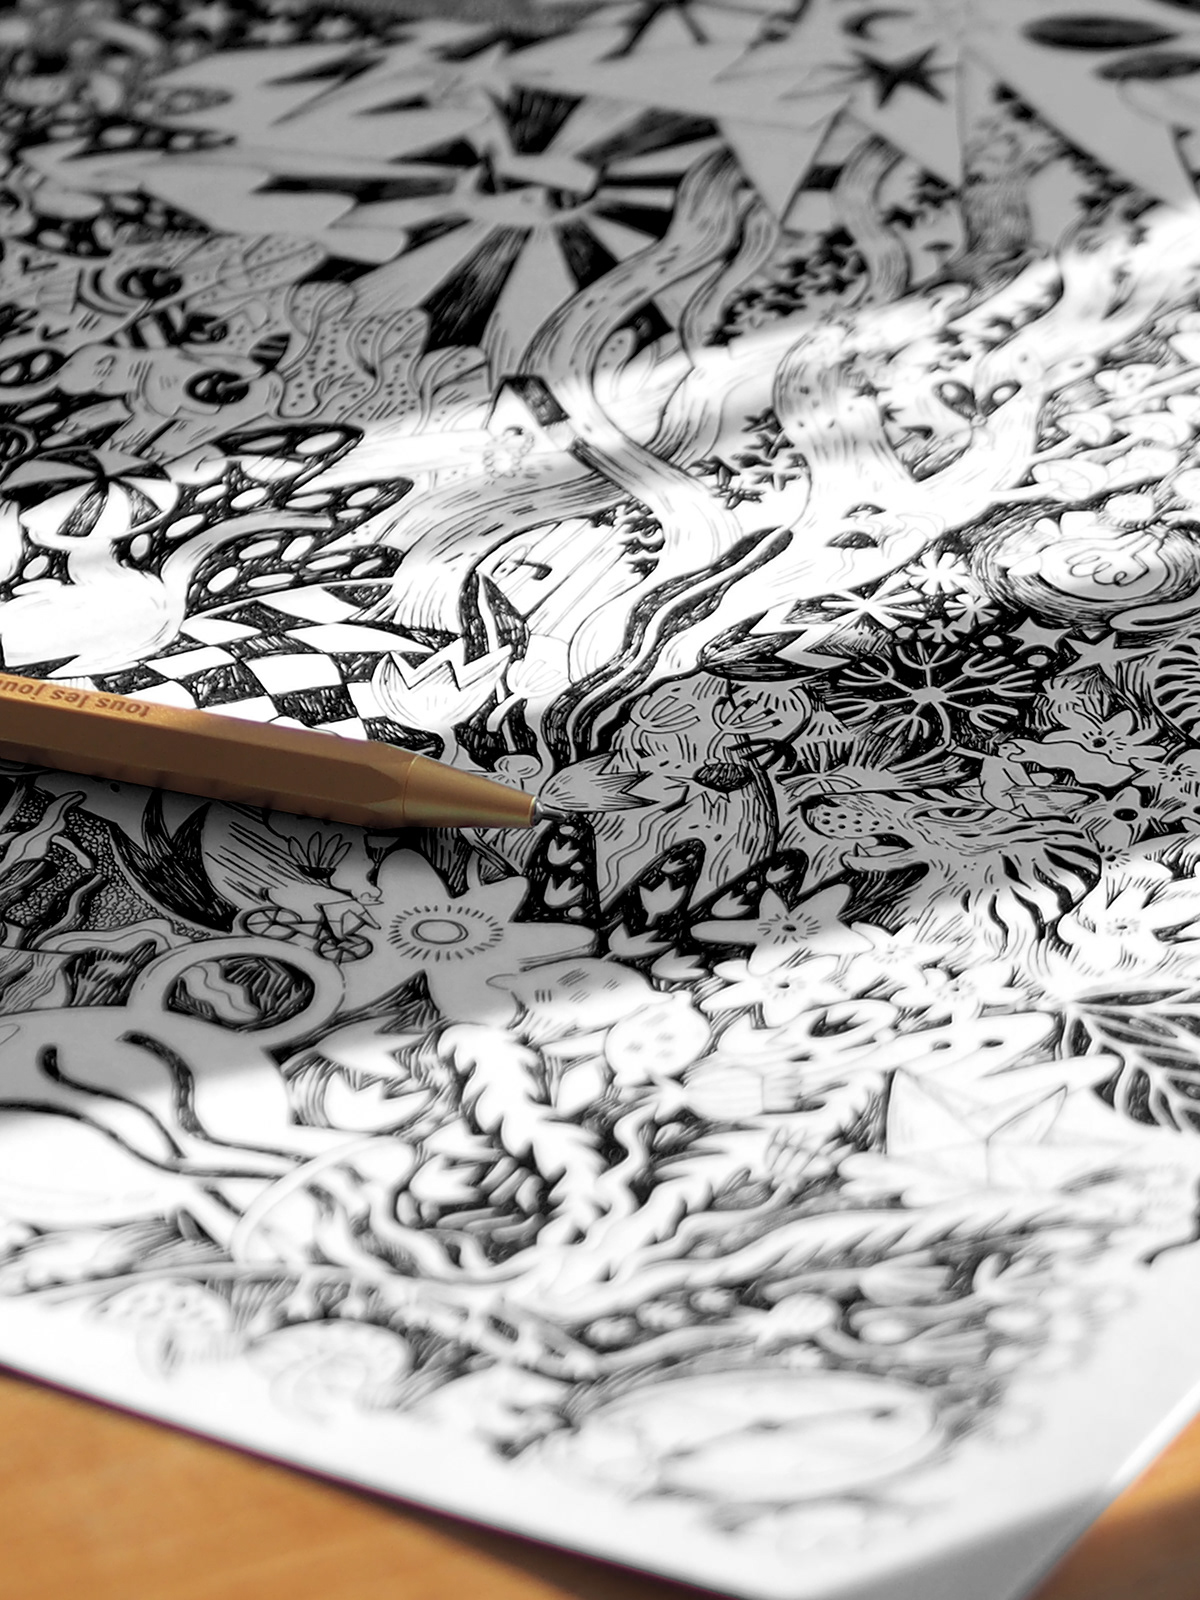 doodle black and white Drawing  Red Bull animals illustration details Competition ILLUSTRATION  doodleart ink